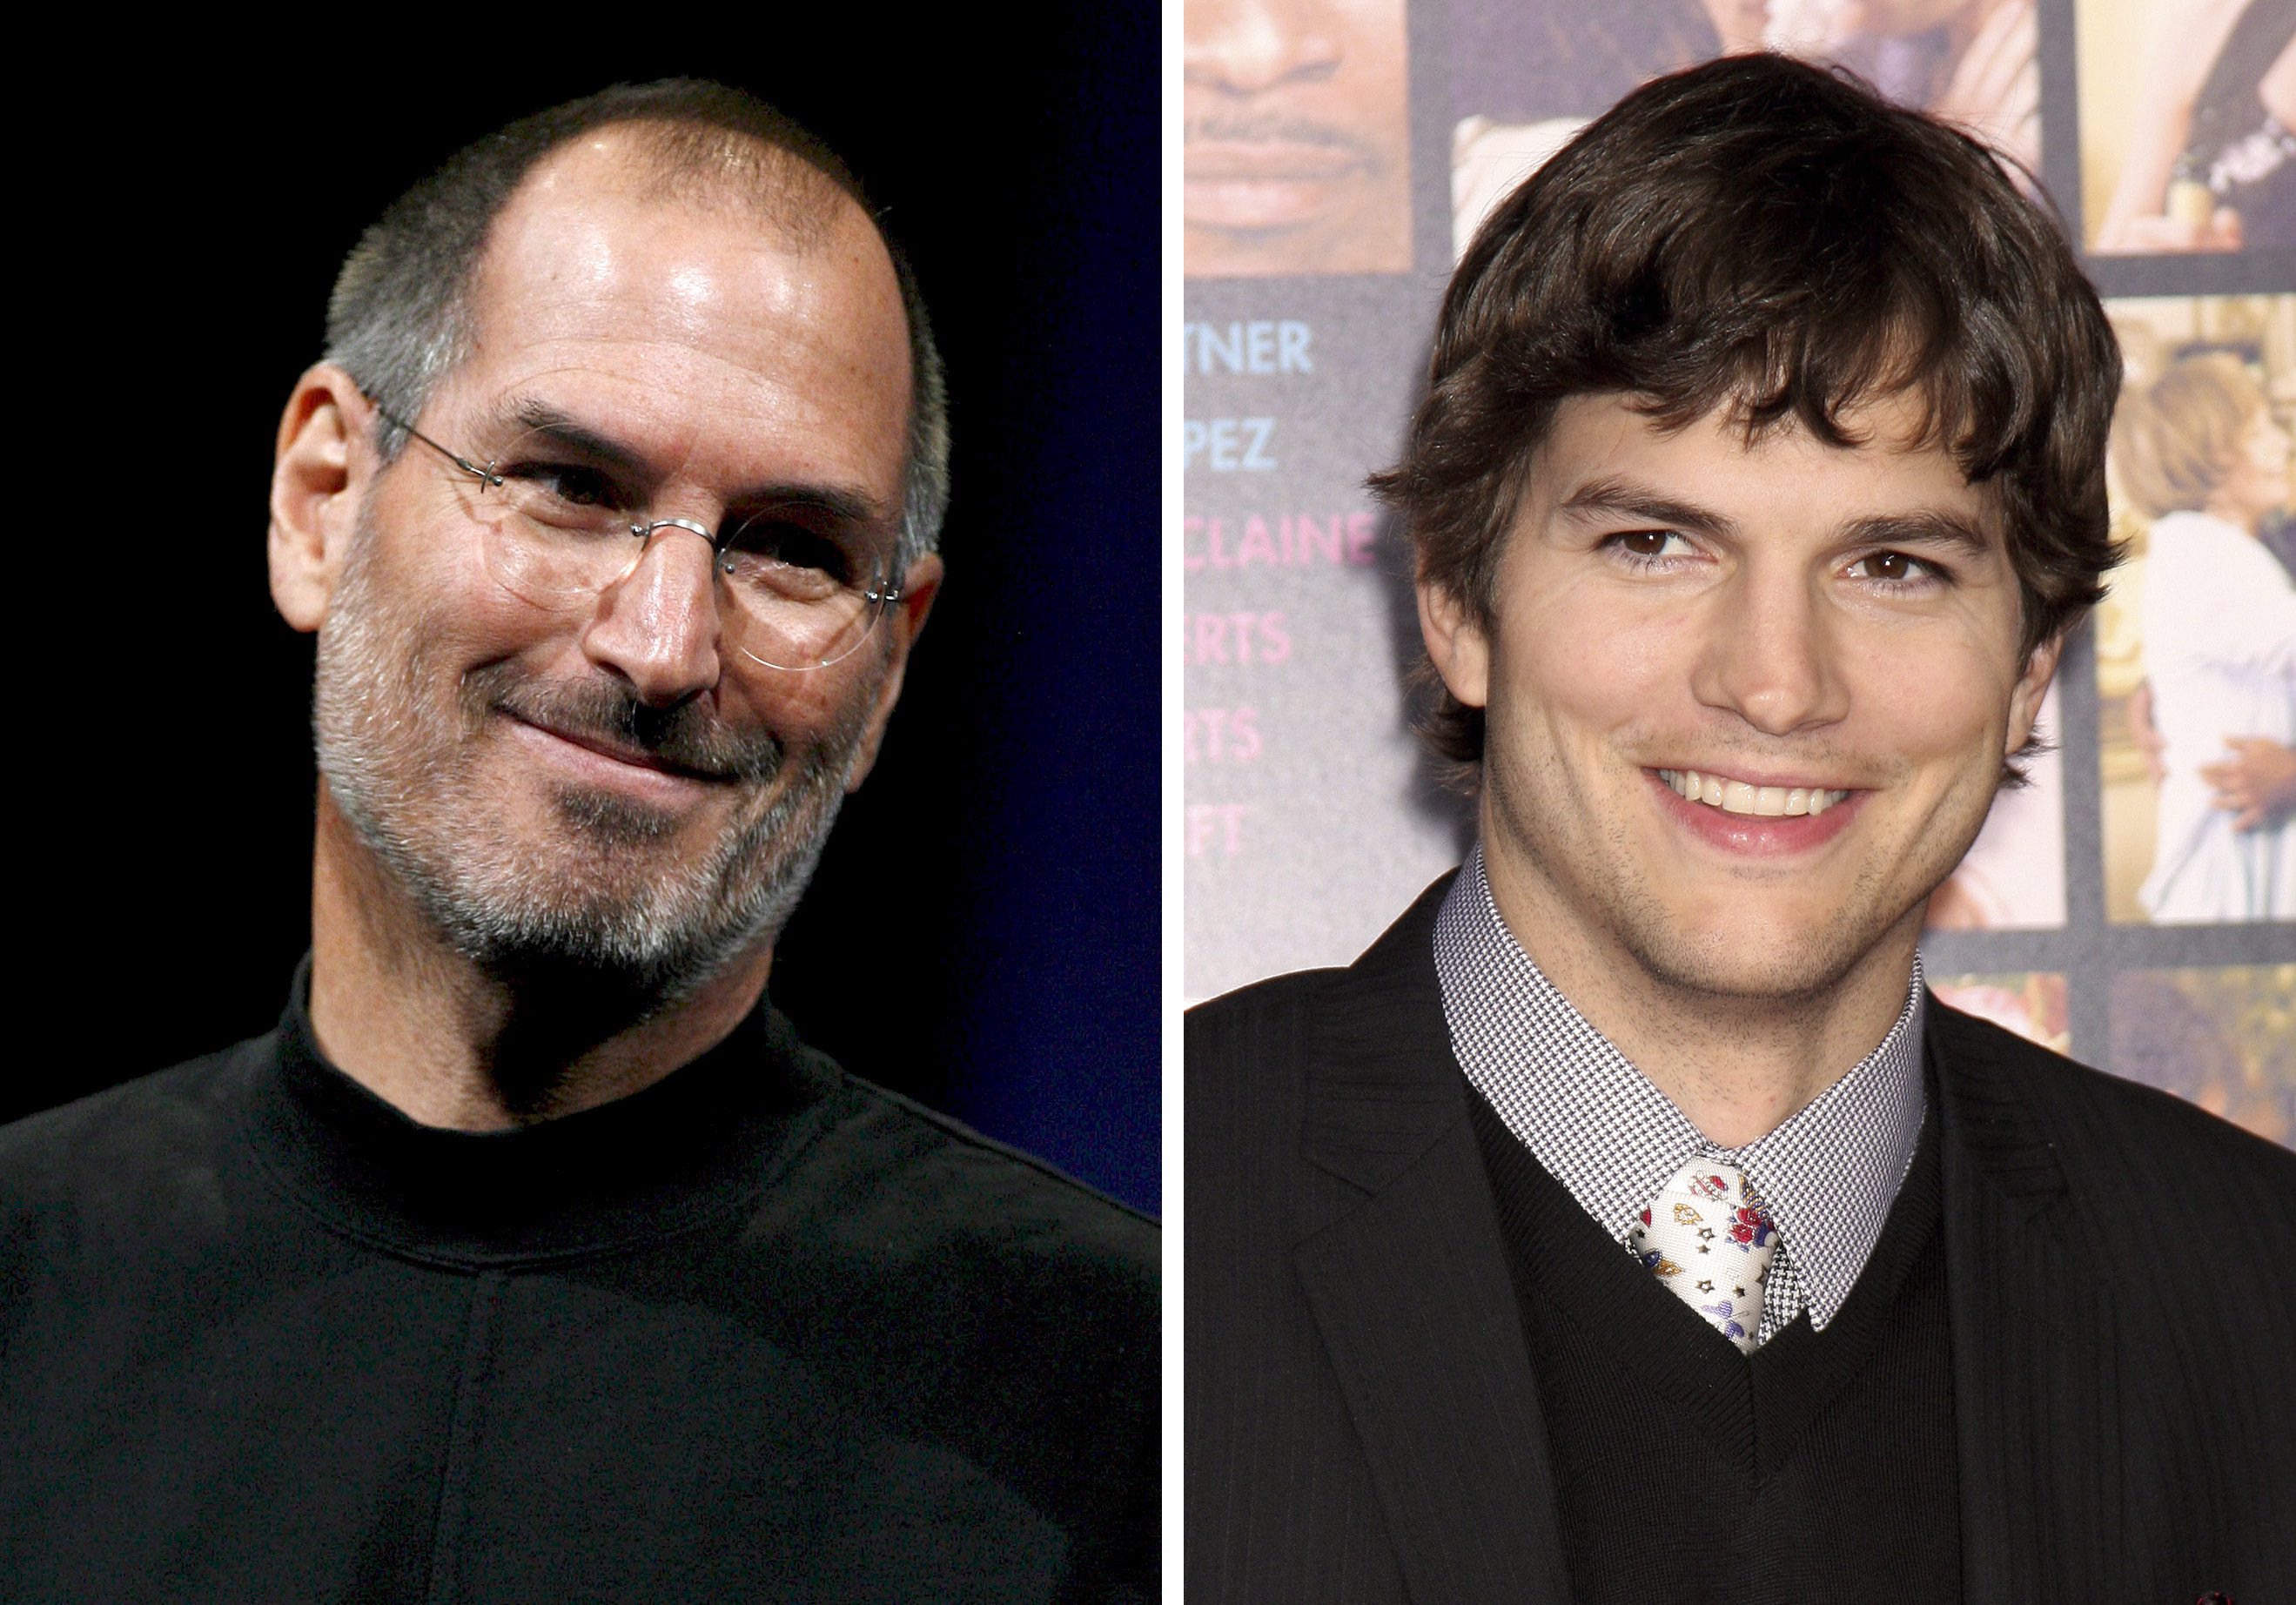 Ashton Kutcher plays Steve Jobs in a movie to be released in April. Photo: SCMP